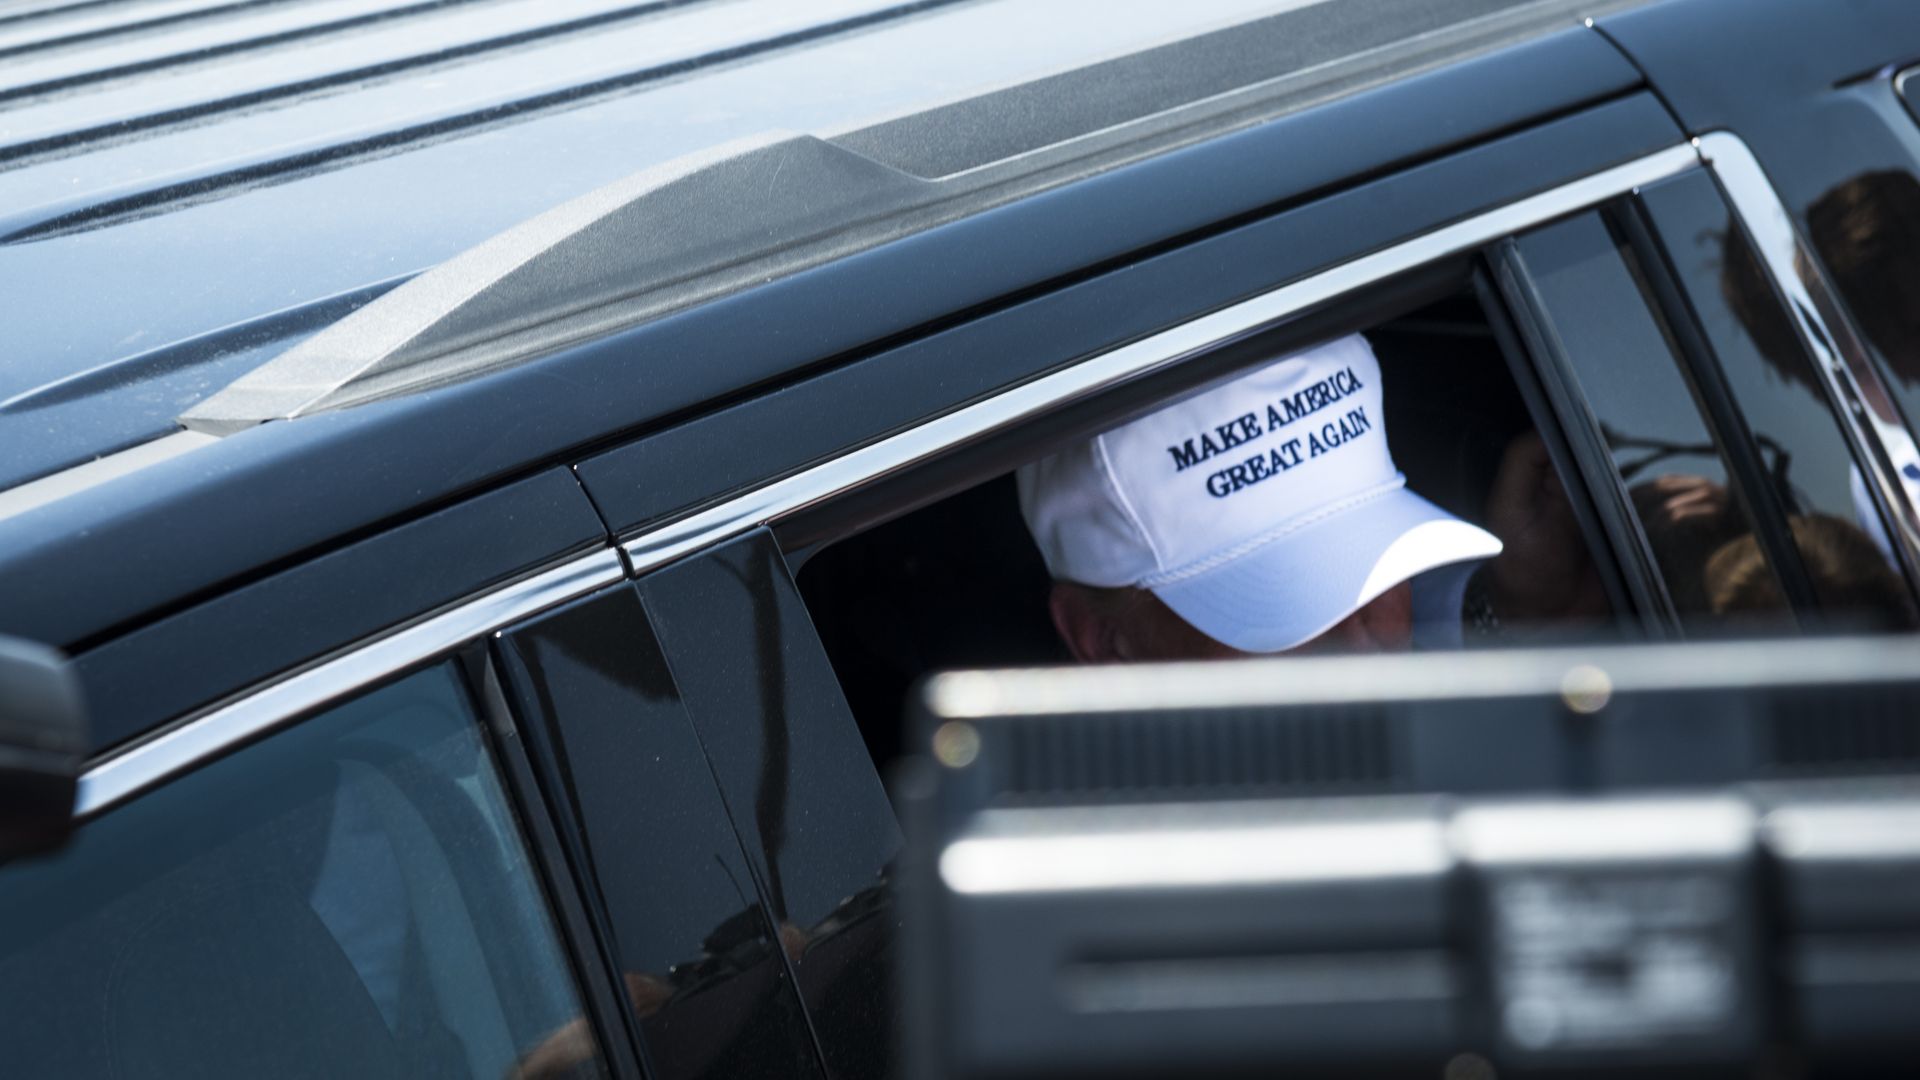 President Trump stepping out of a car